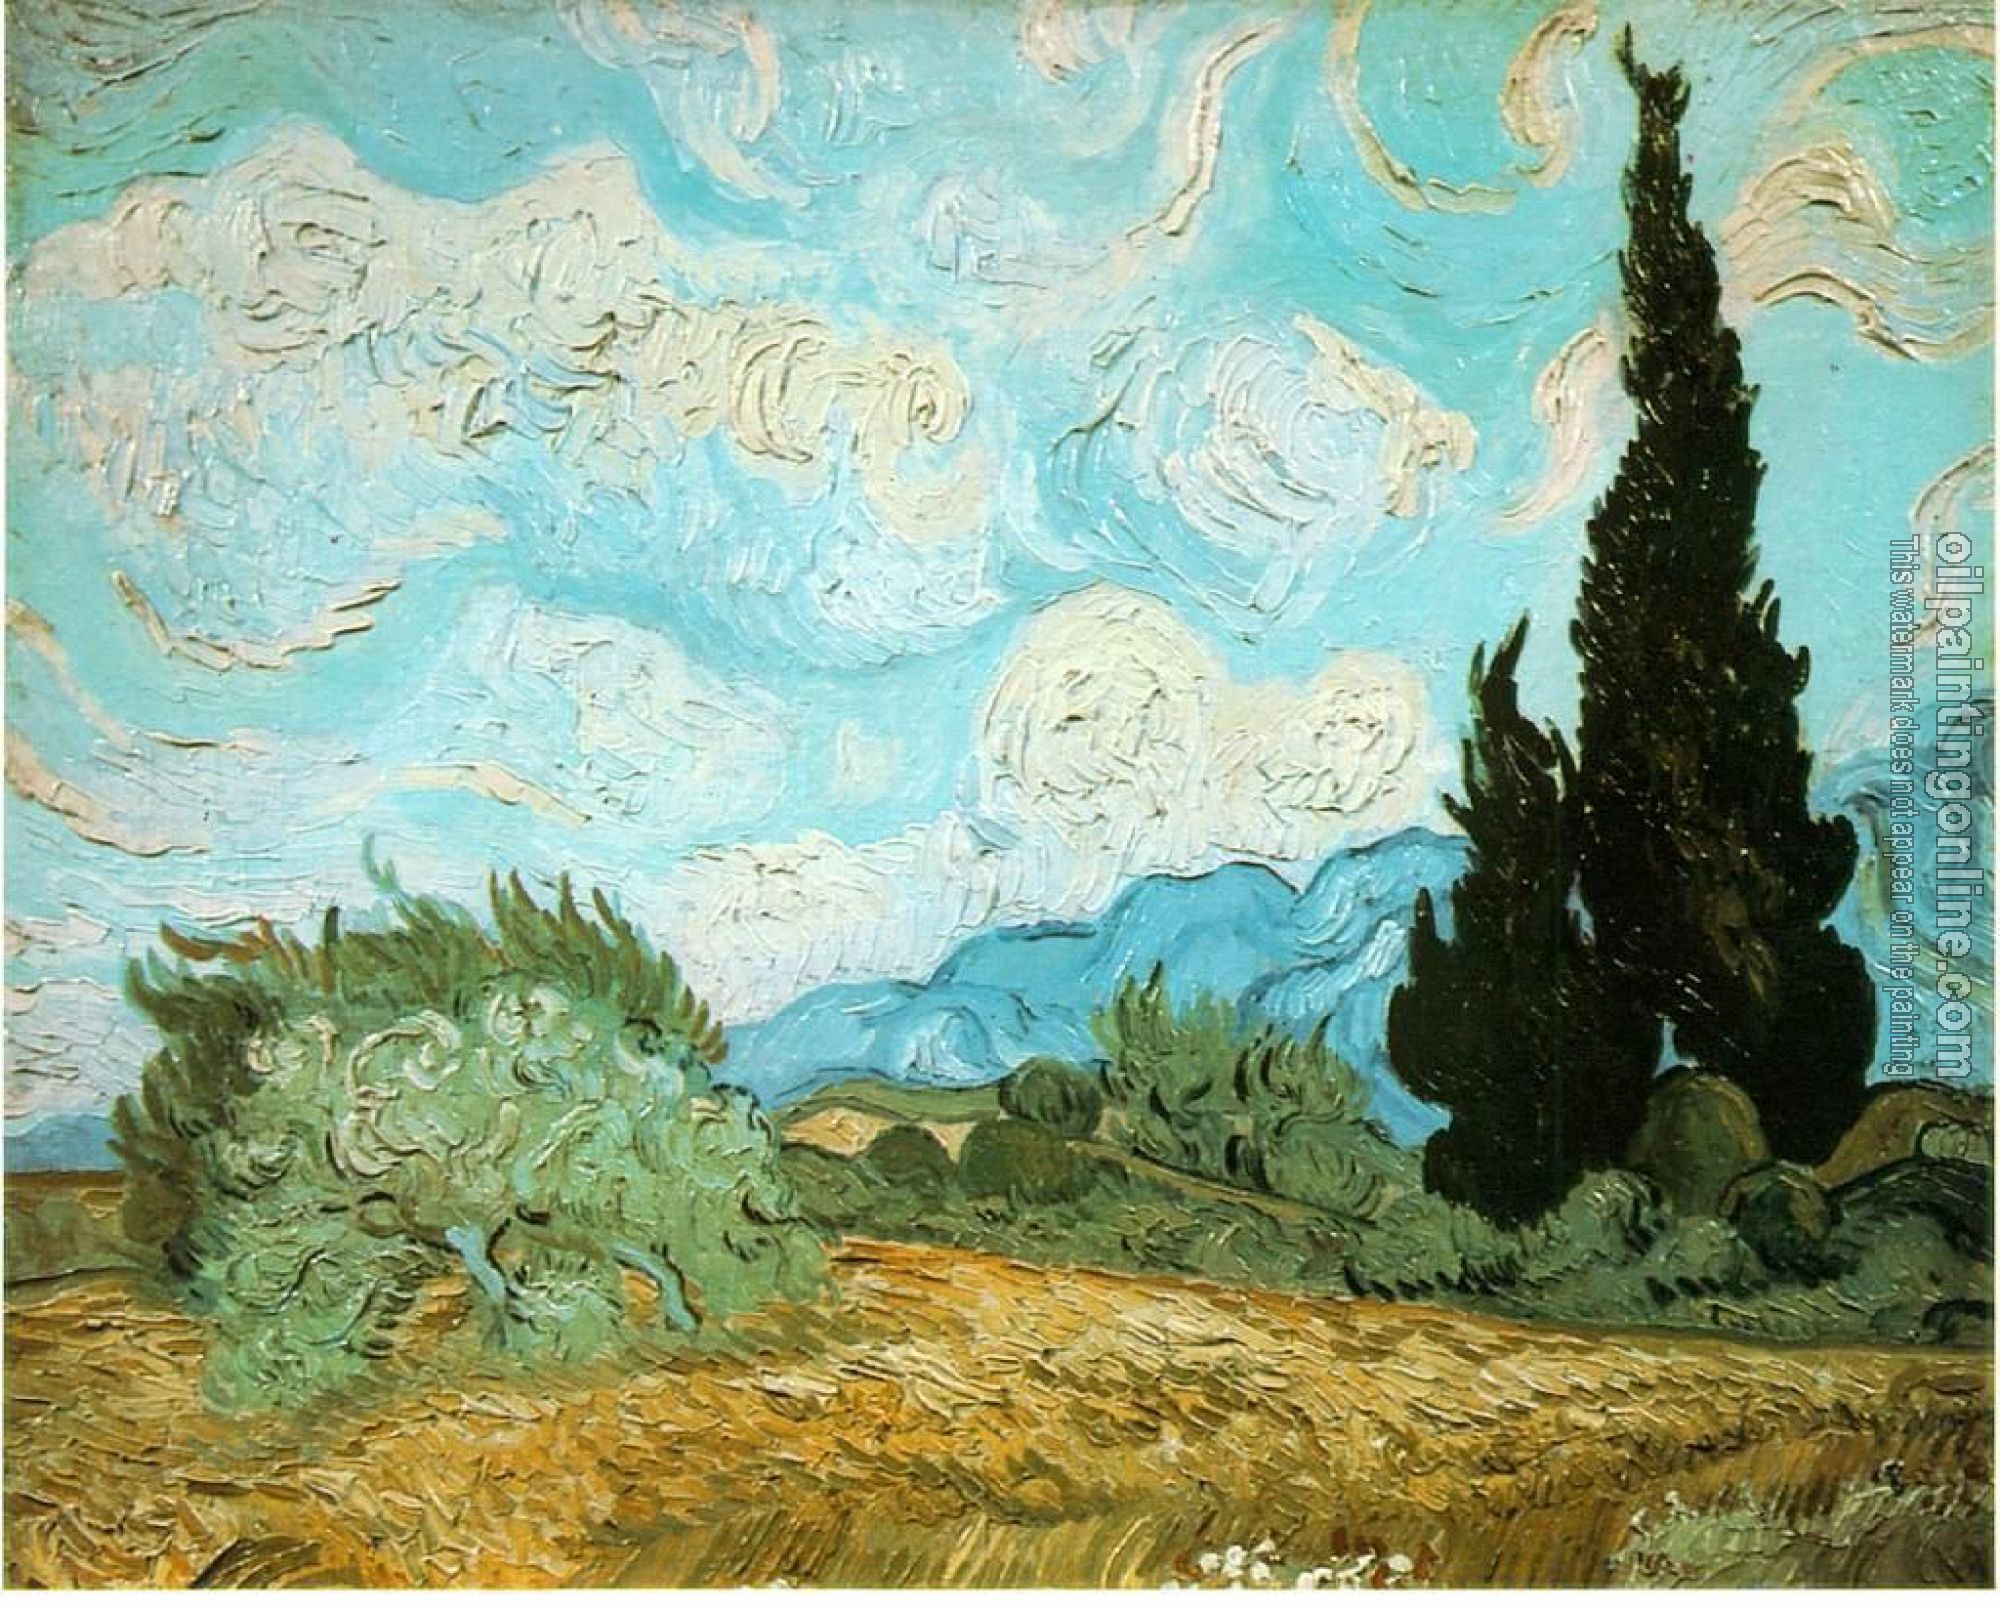 Gogh, Vincent van - Wheat Field with Cypresses